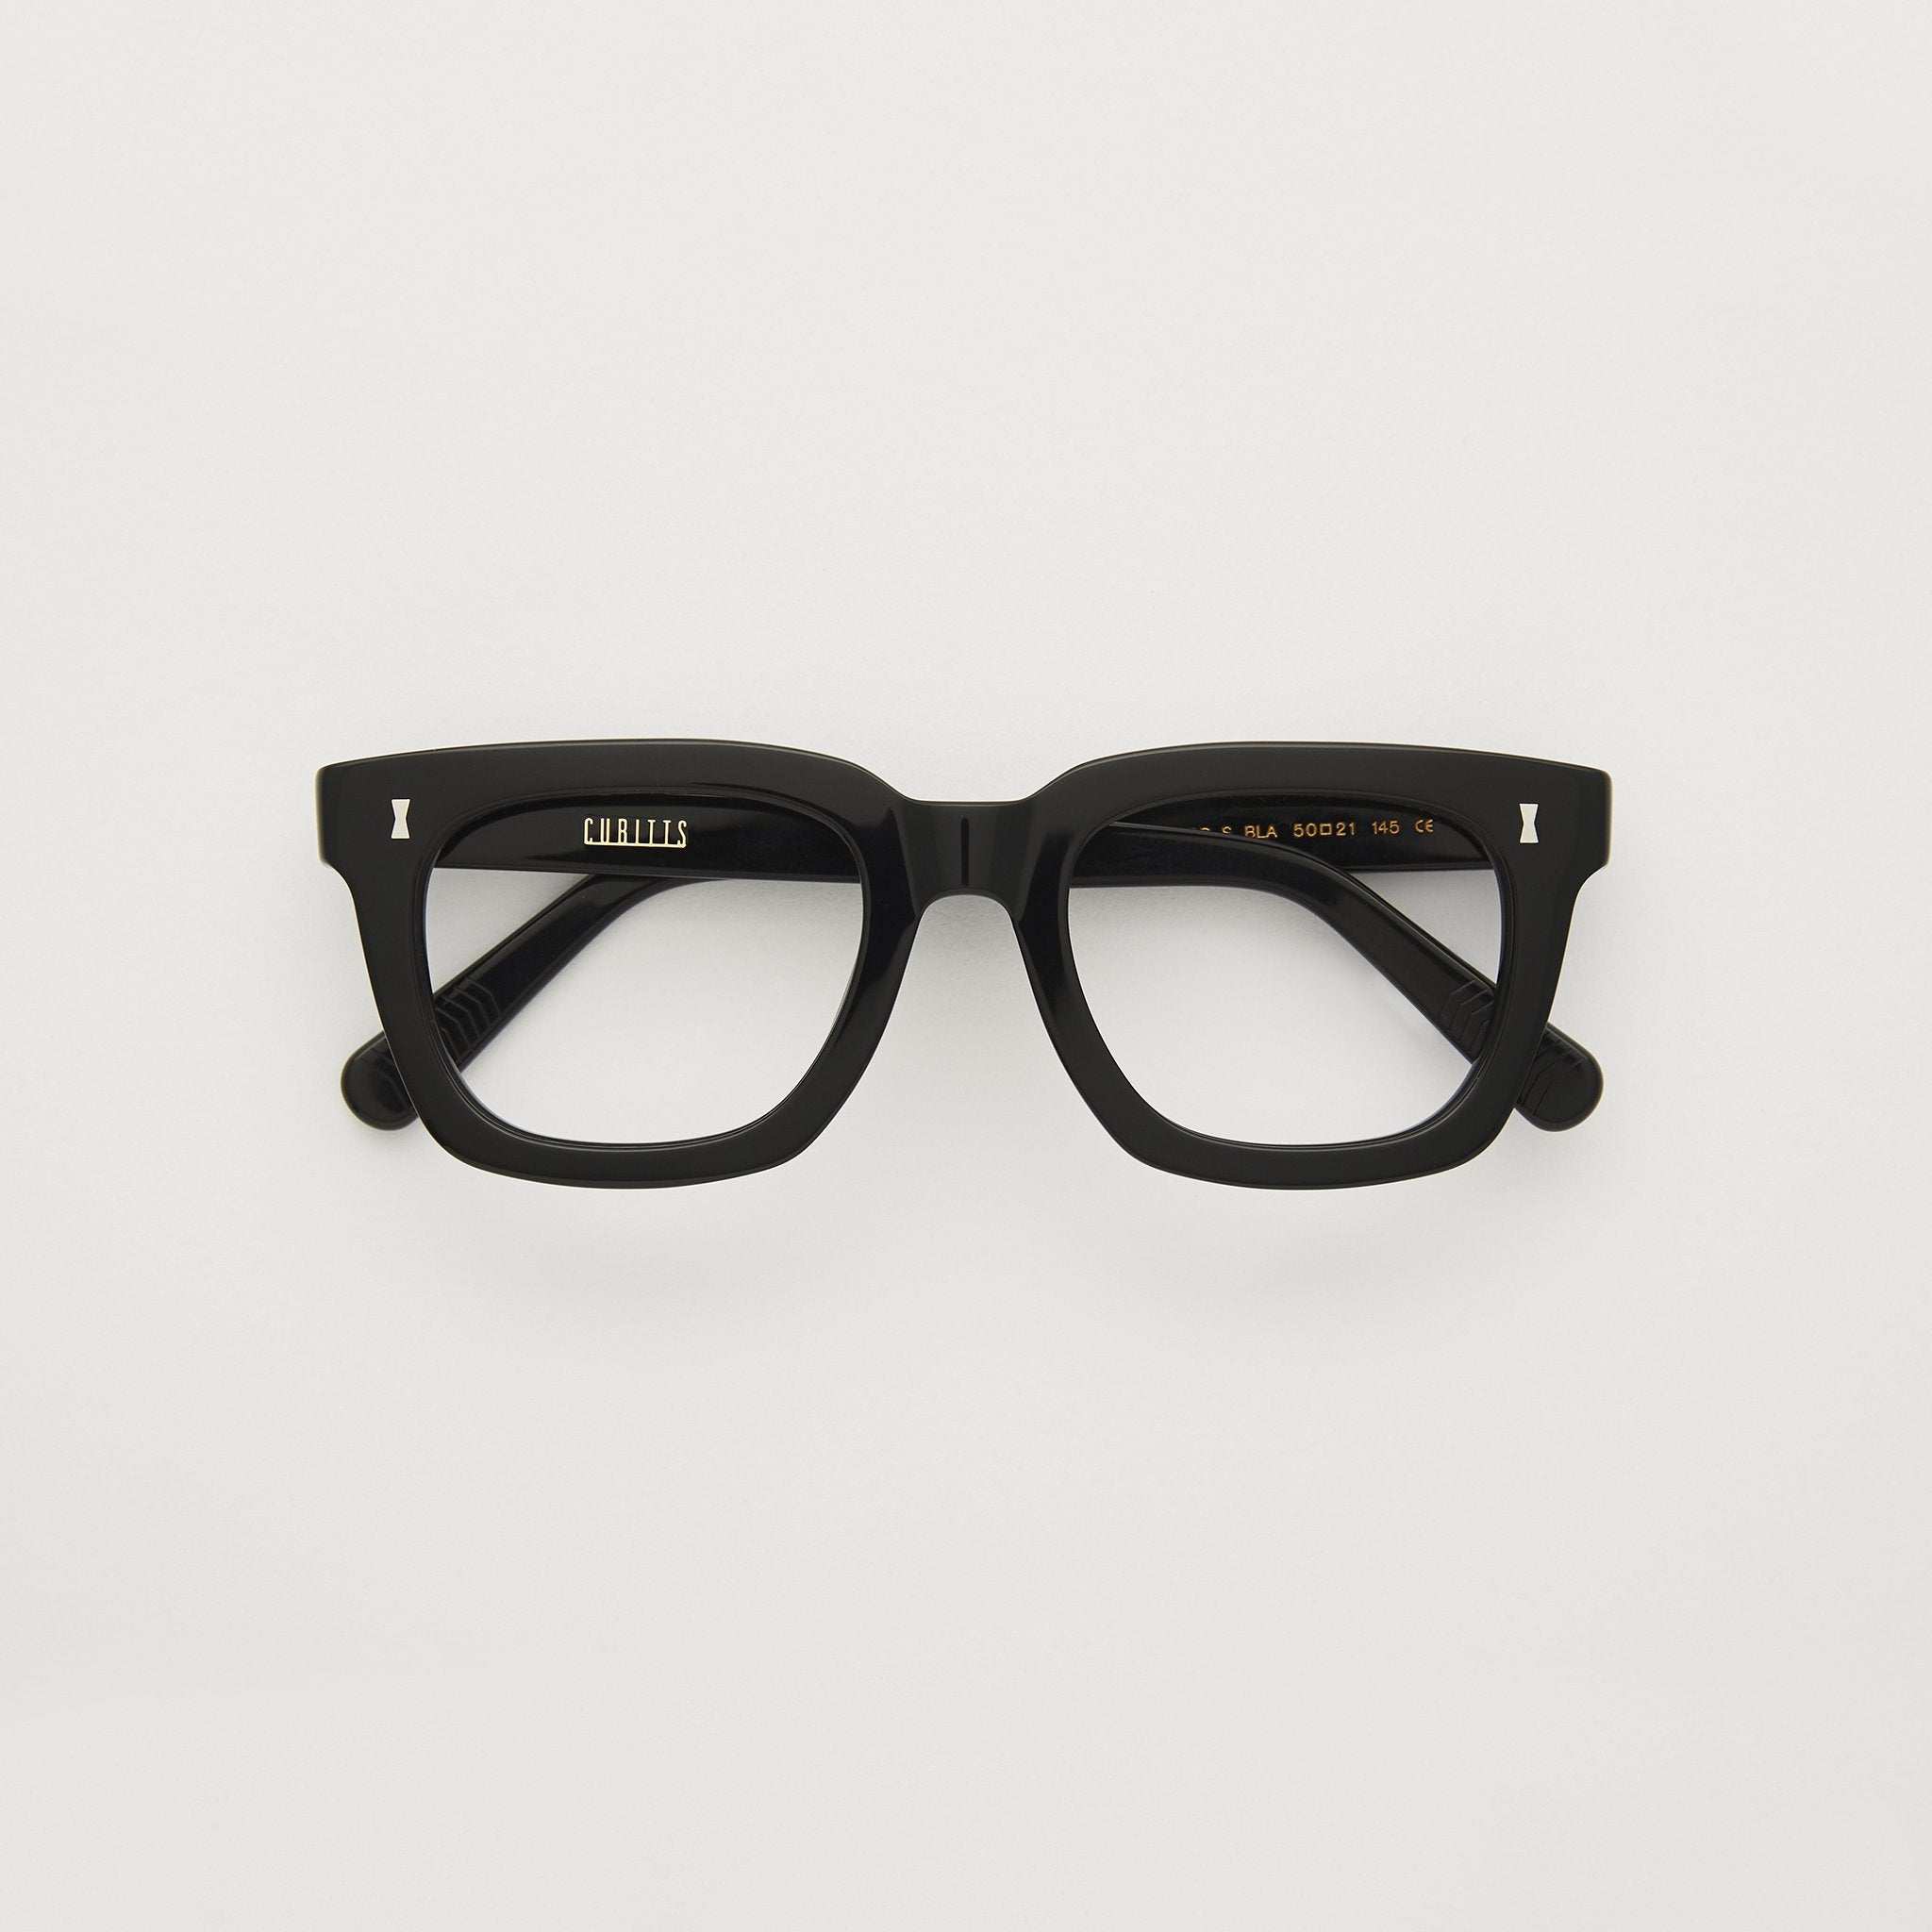 Judd: Large Square Thick Frame Glasses | Cubitts